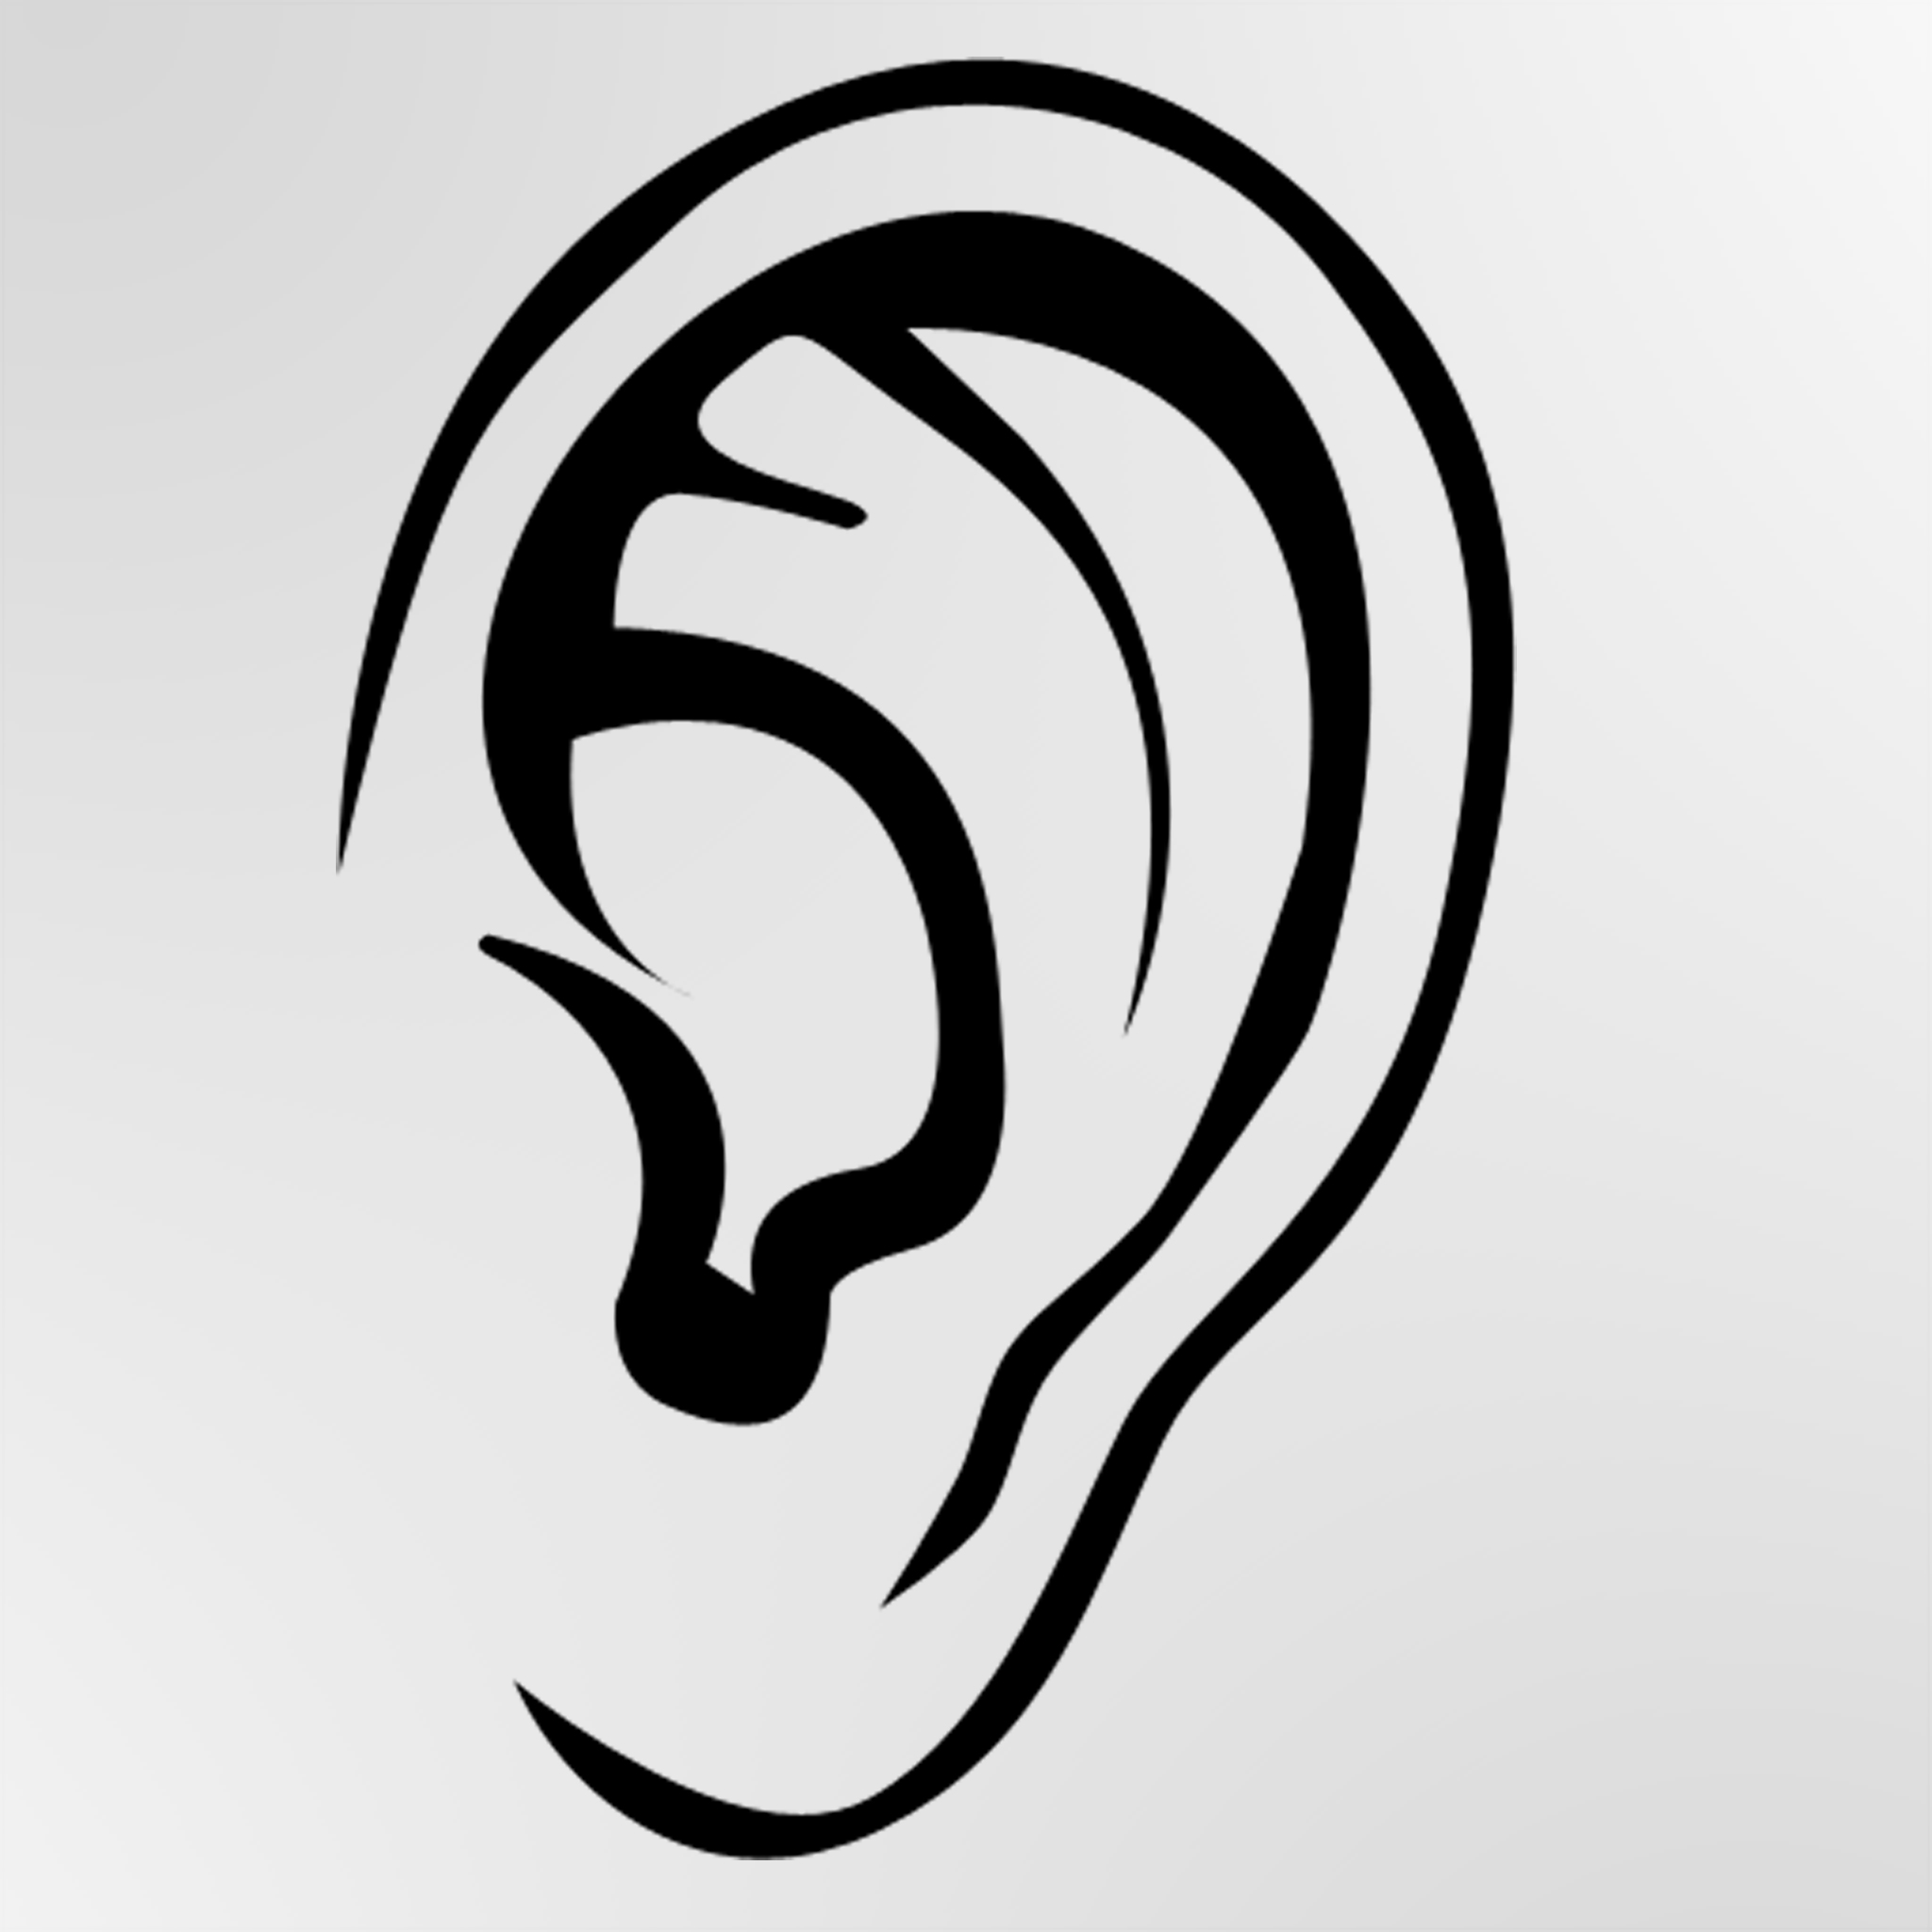 Pictures of ears clipart image #12144